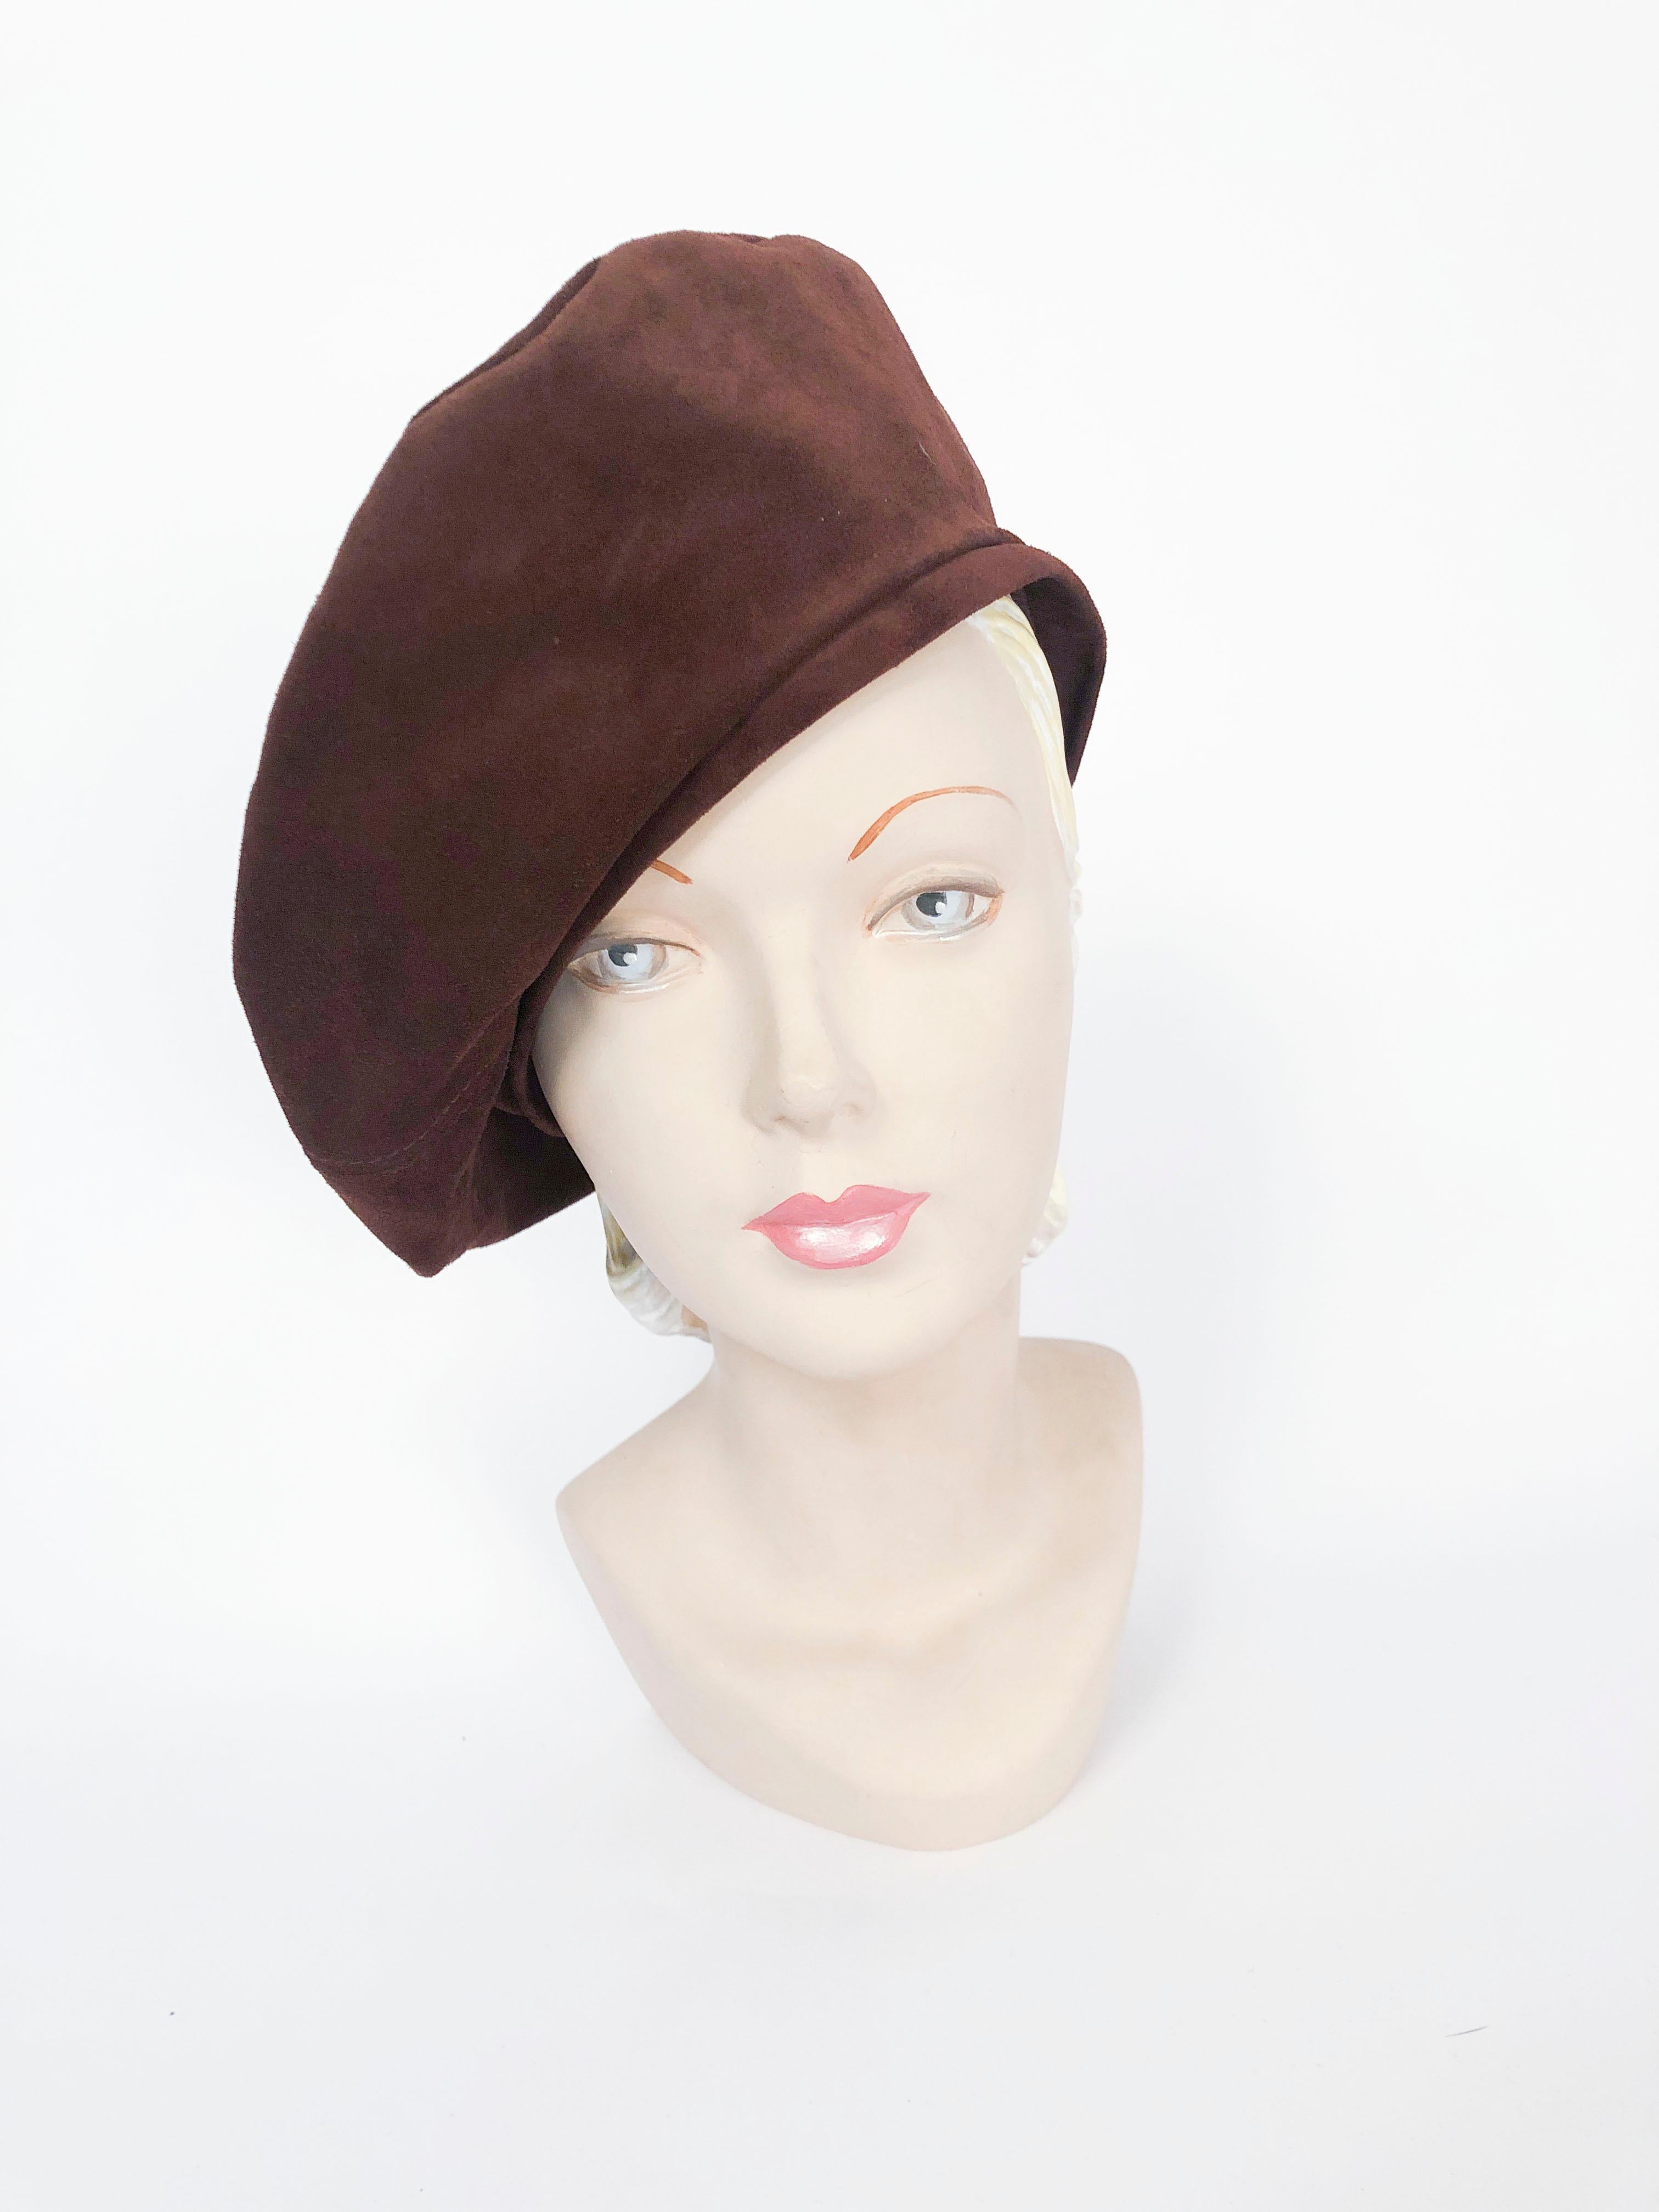 Saks Fifth Ave Chocolate Brown Suede Beret with gros-grain hat band.